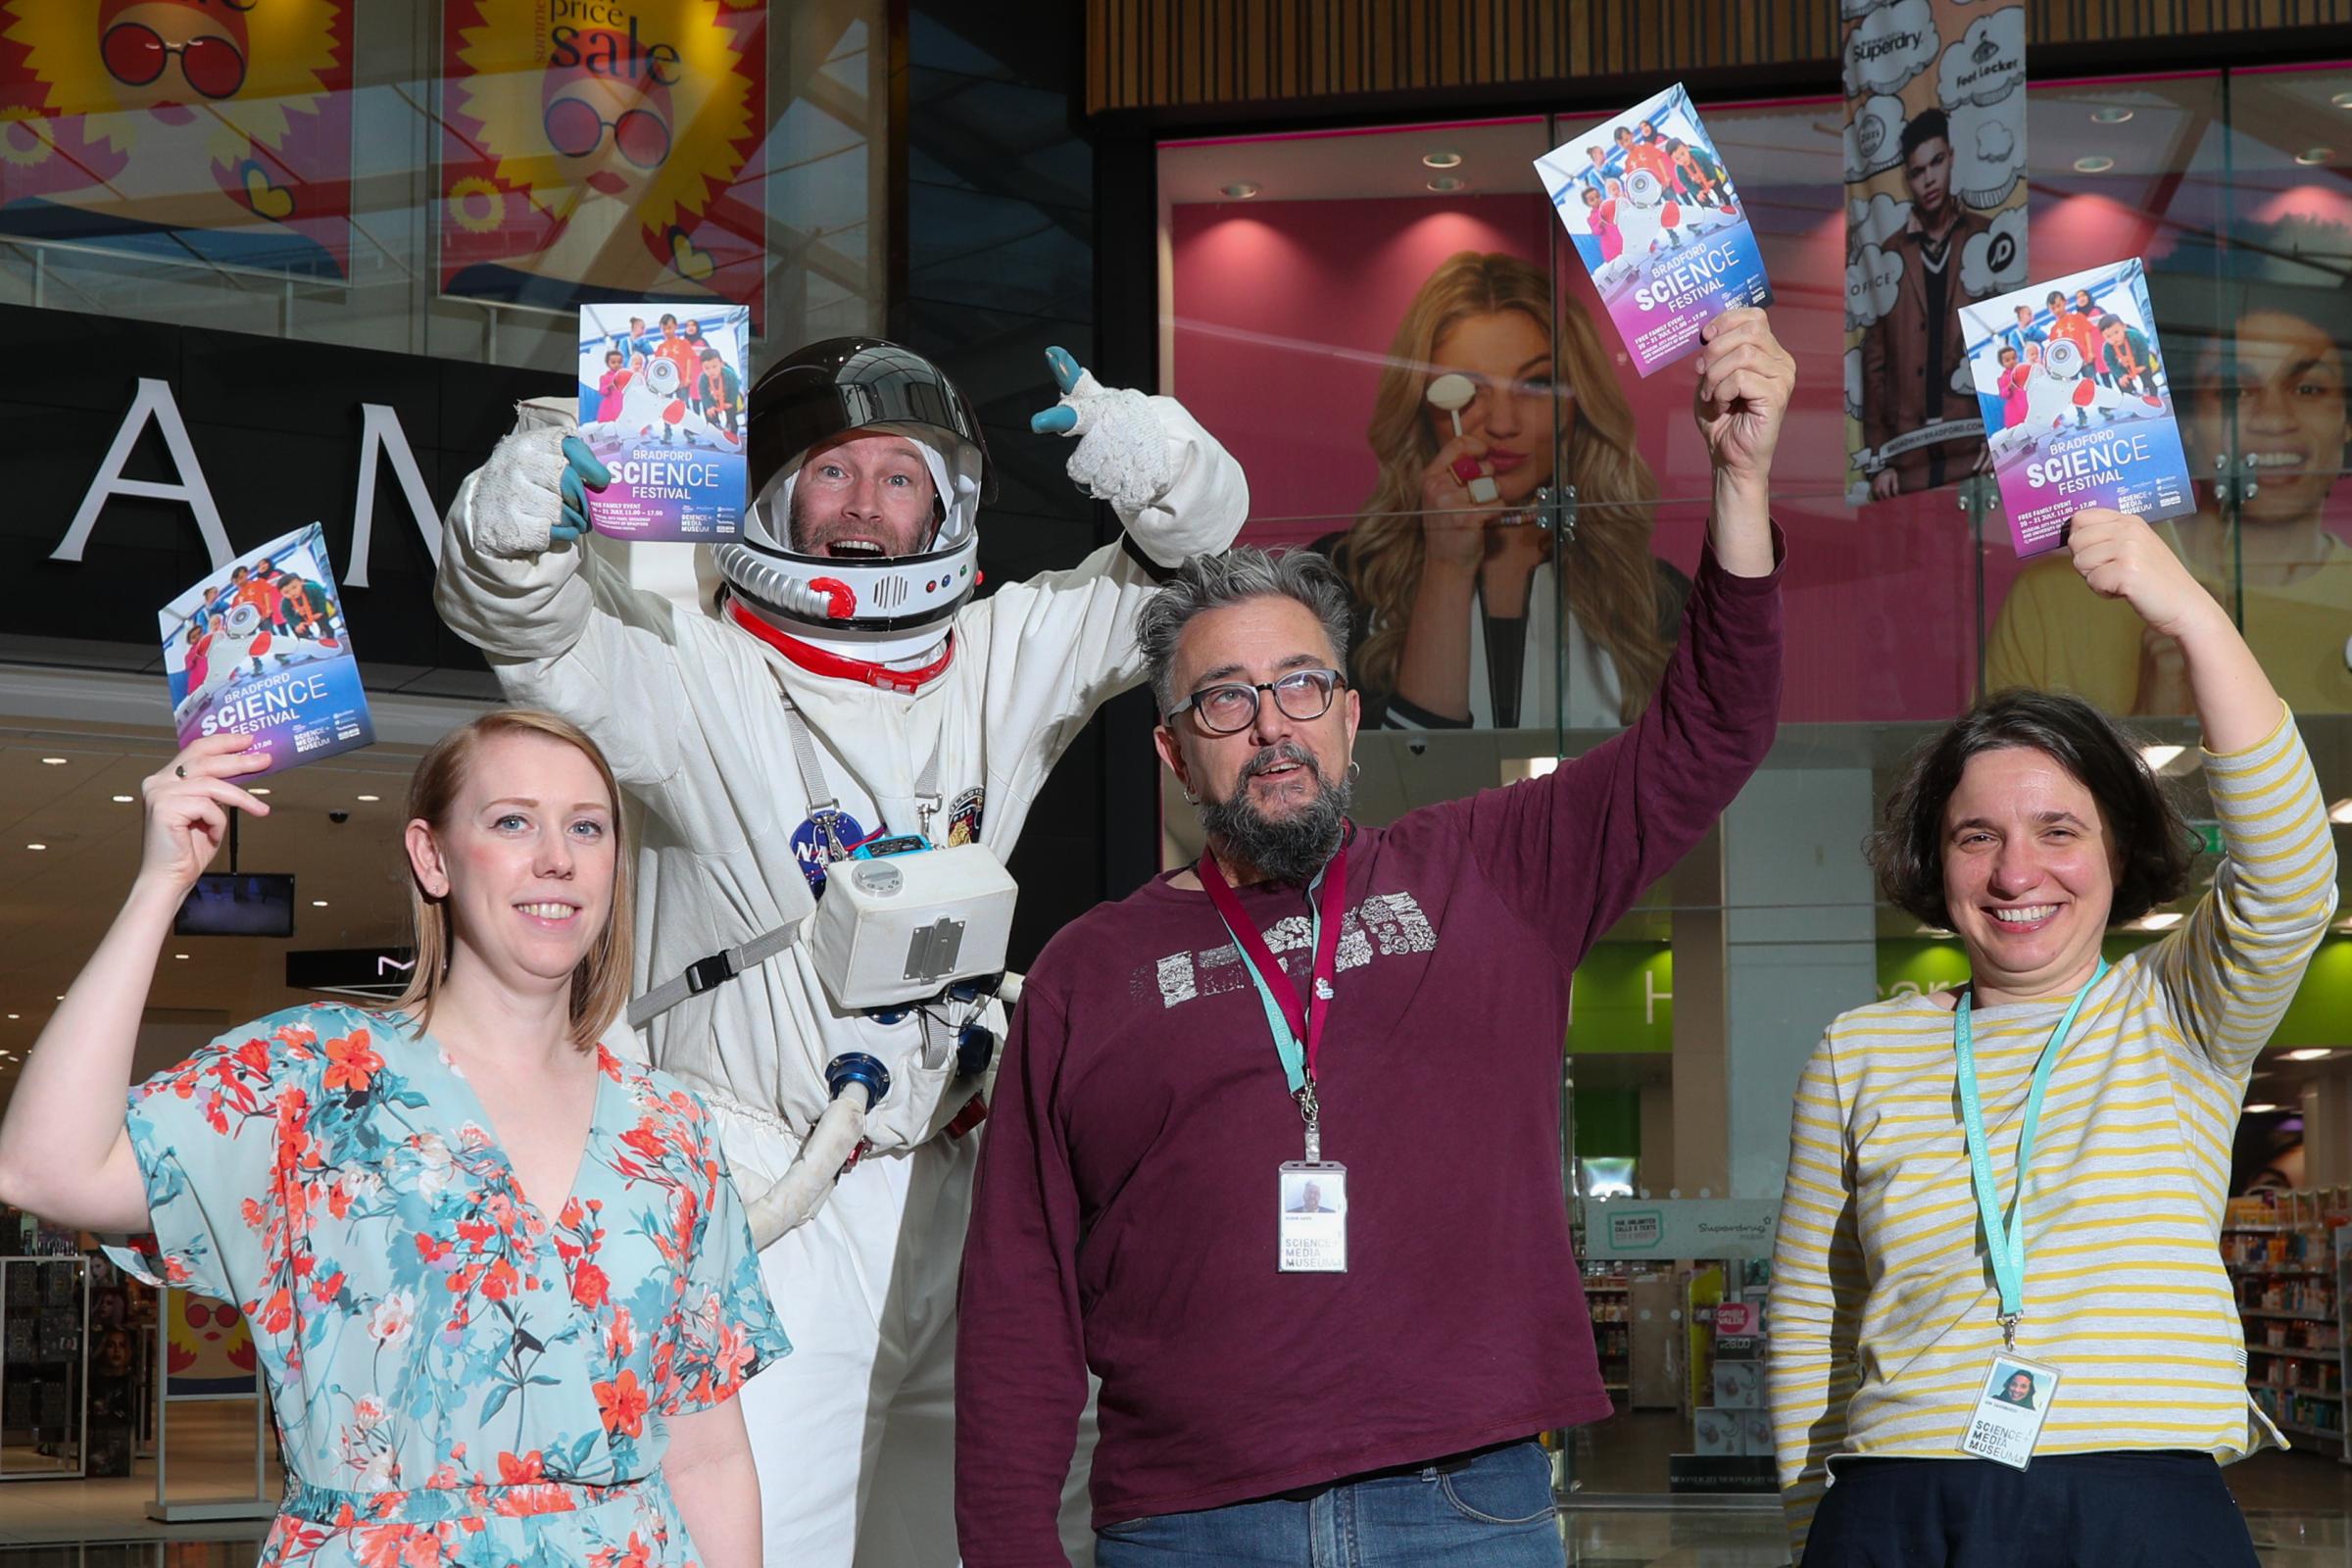 Science Festival to mark 50th anniversary of Moon landings